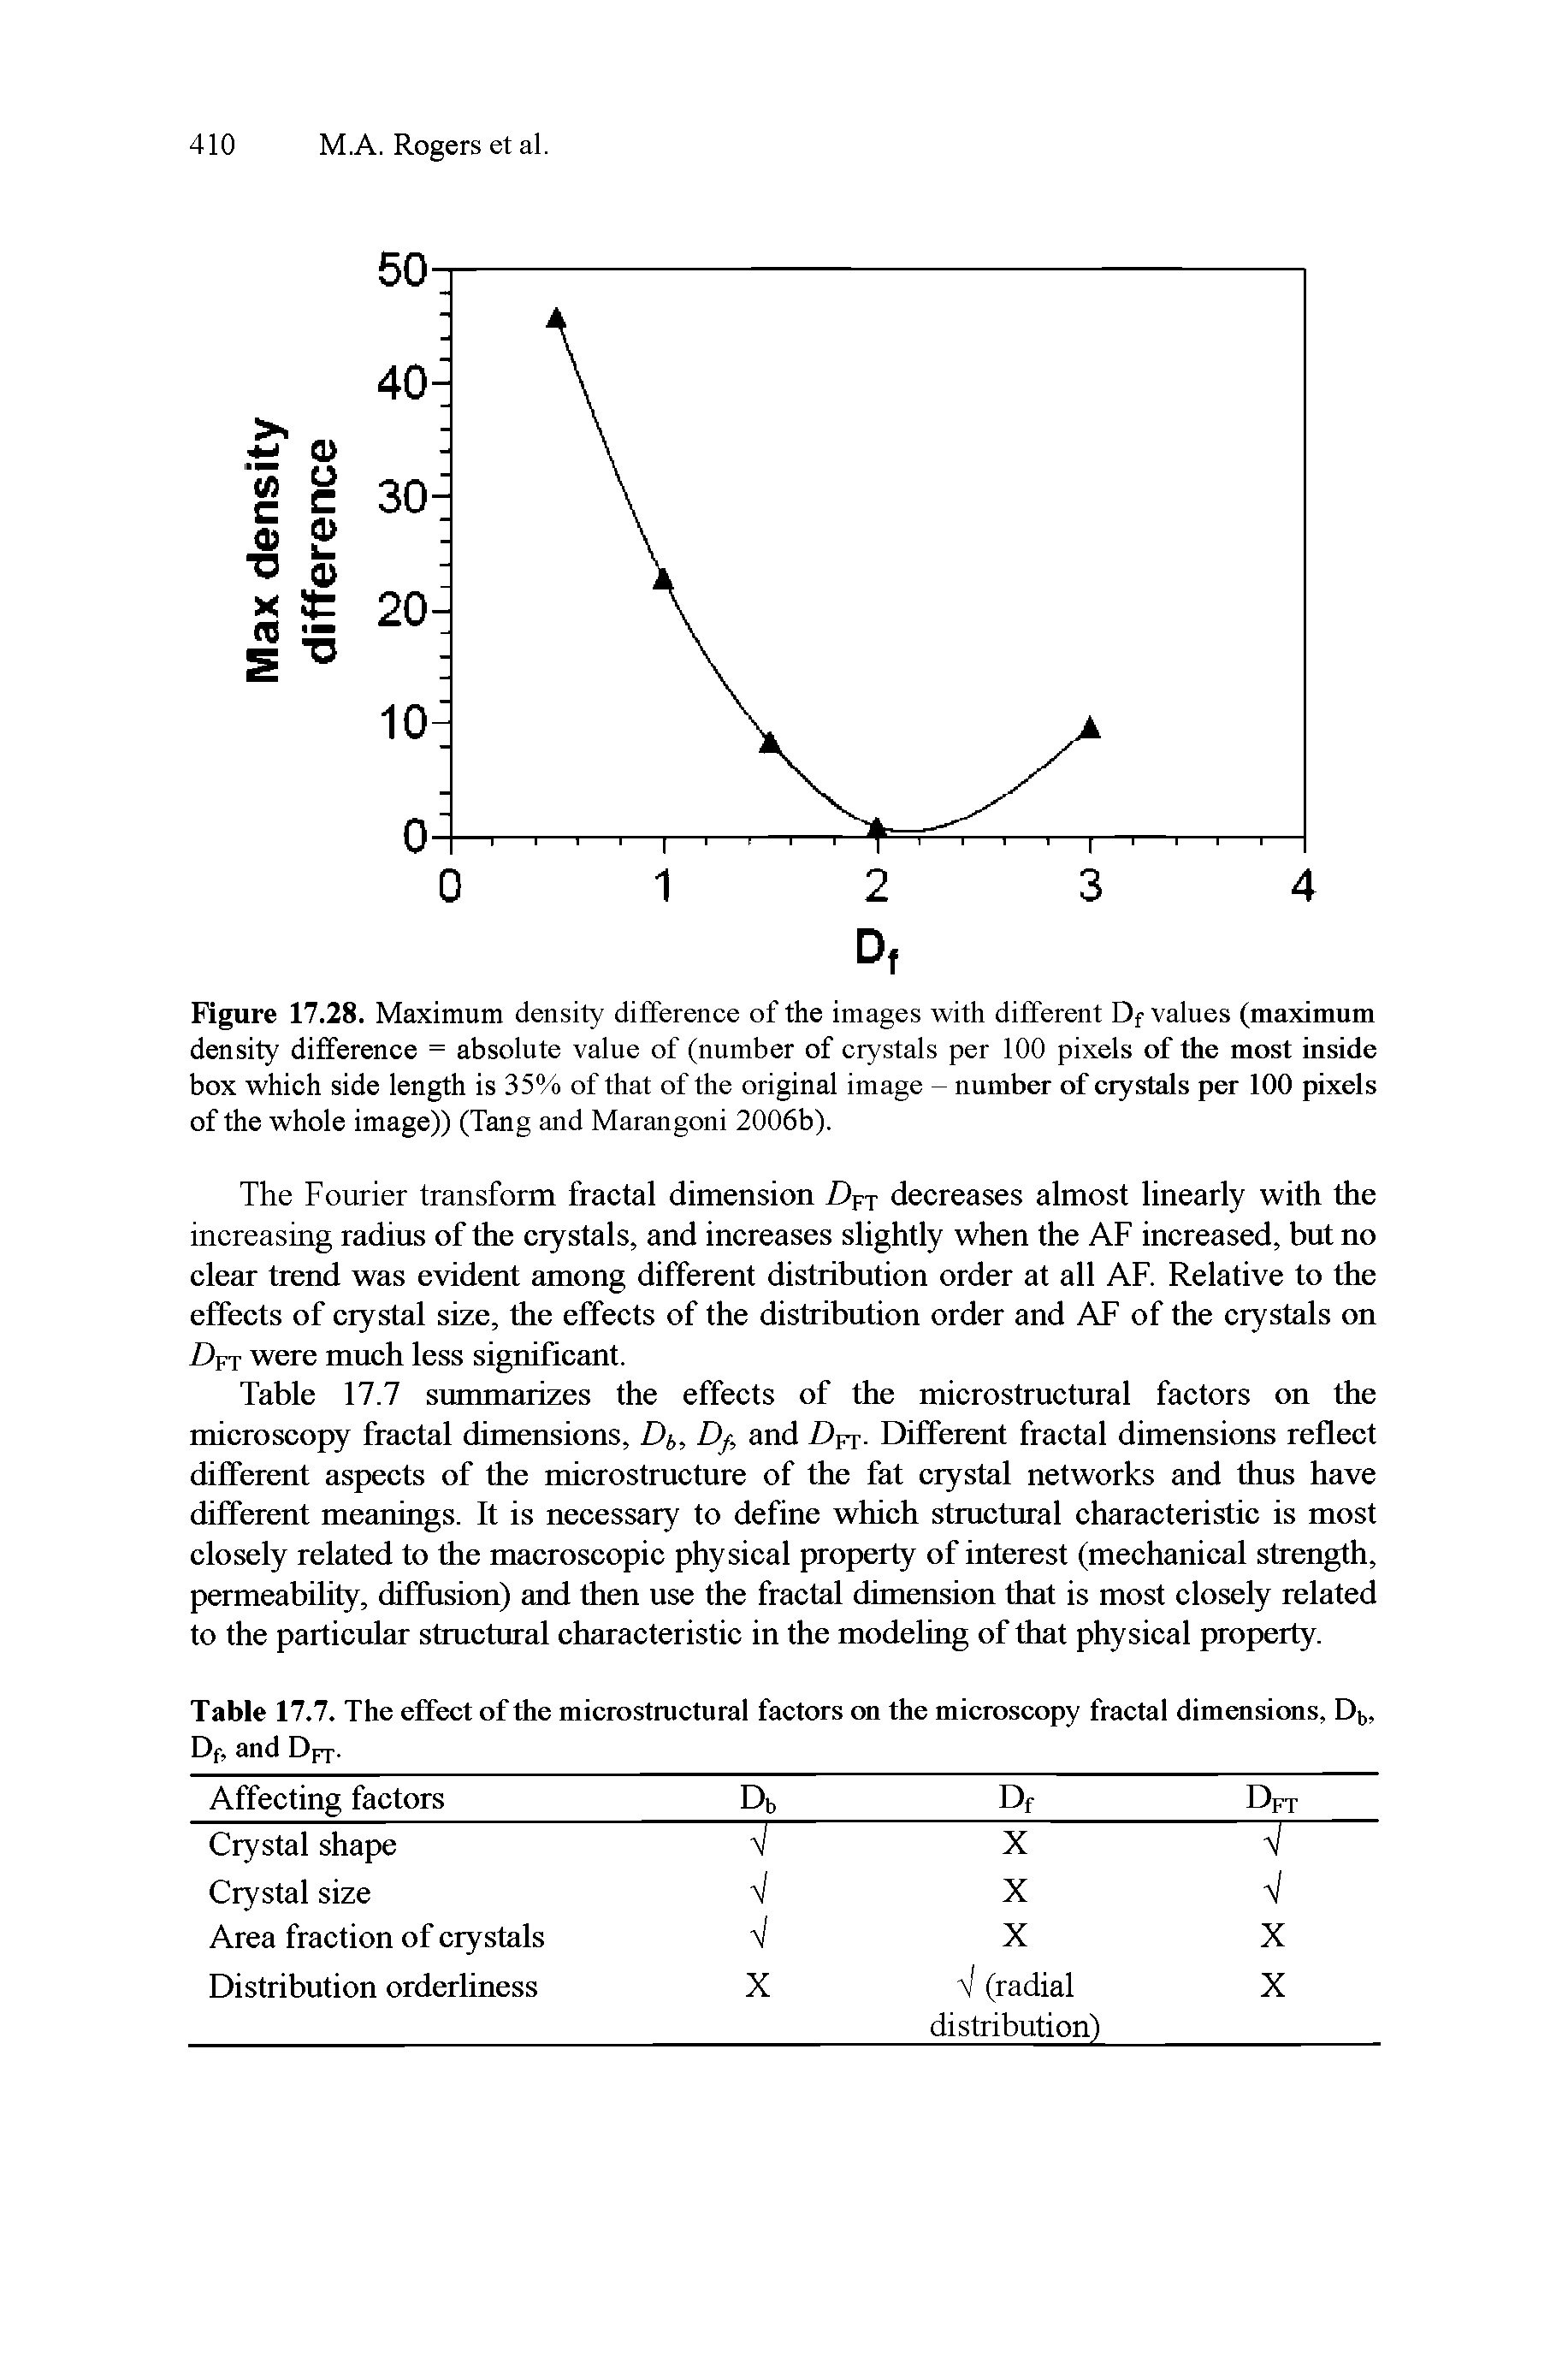 Table 17.7. The effect of the microstructural factors on the microscopy fractal dimensions, D >, Df, and Dfj.